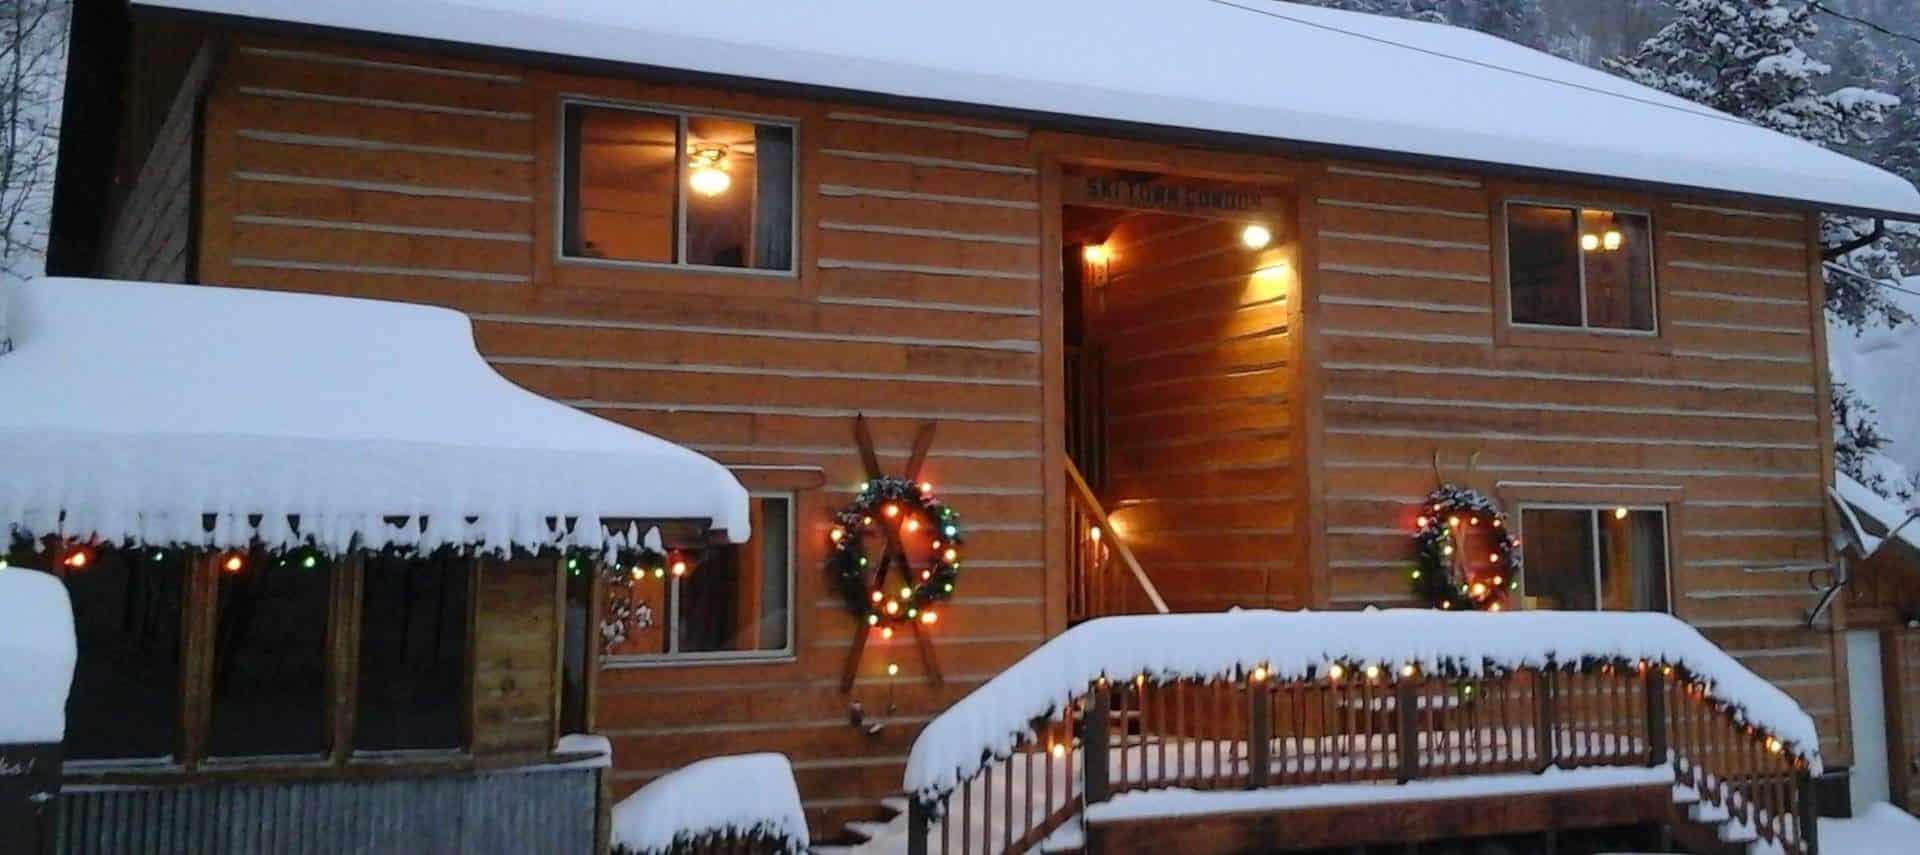 Exterior view of the property with wooden siding all covered in snow and decorated with lights and wreaths